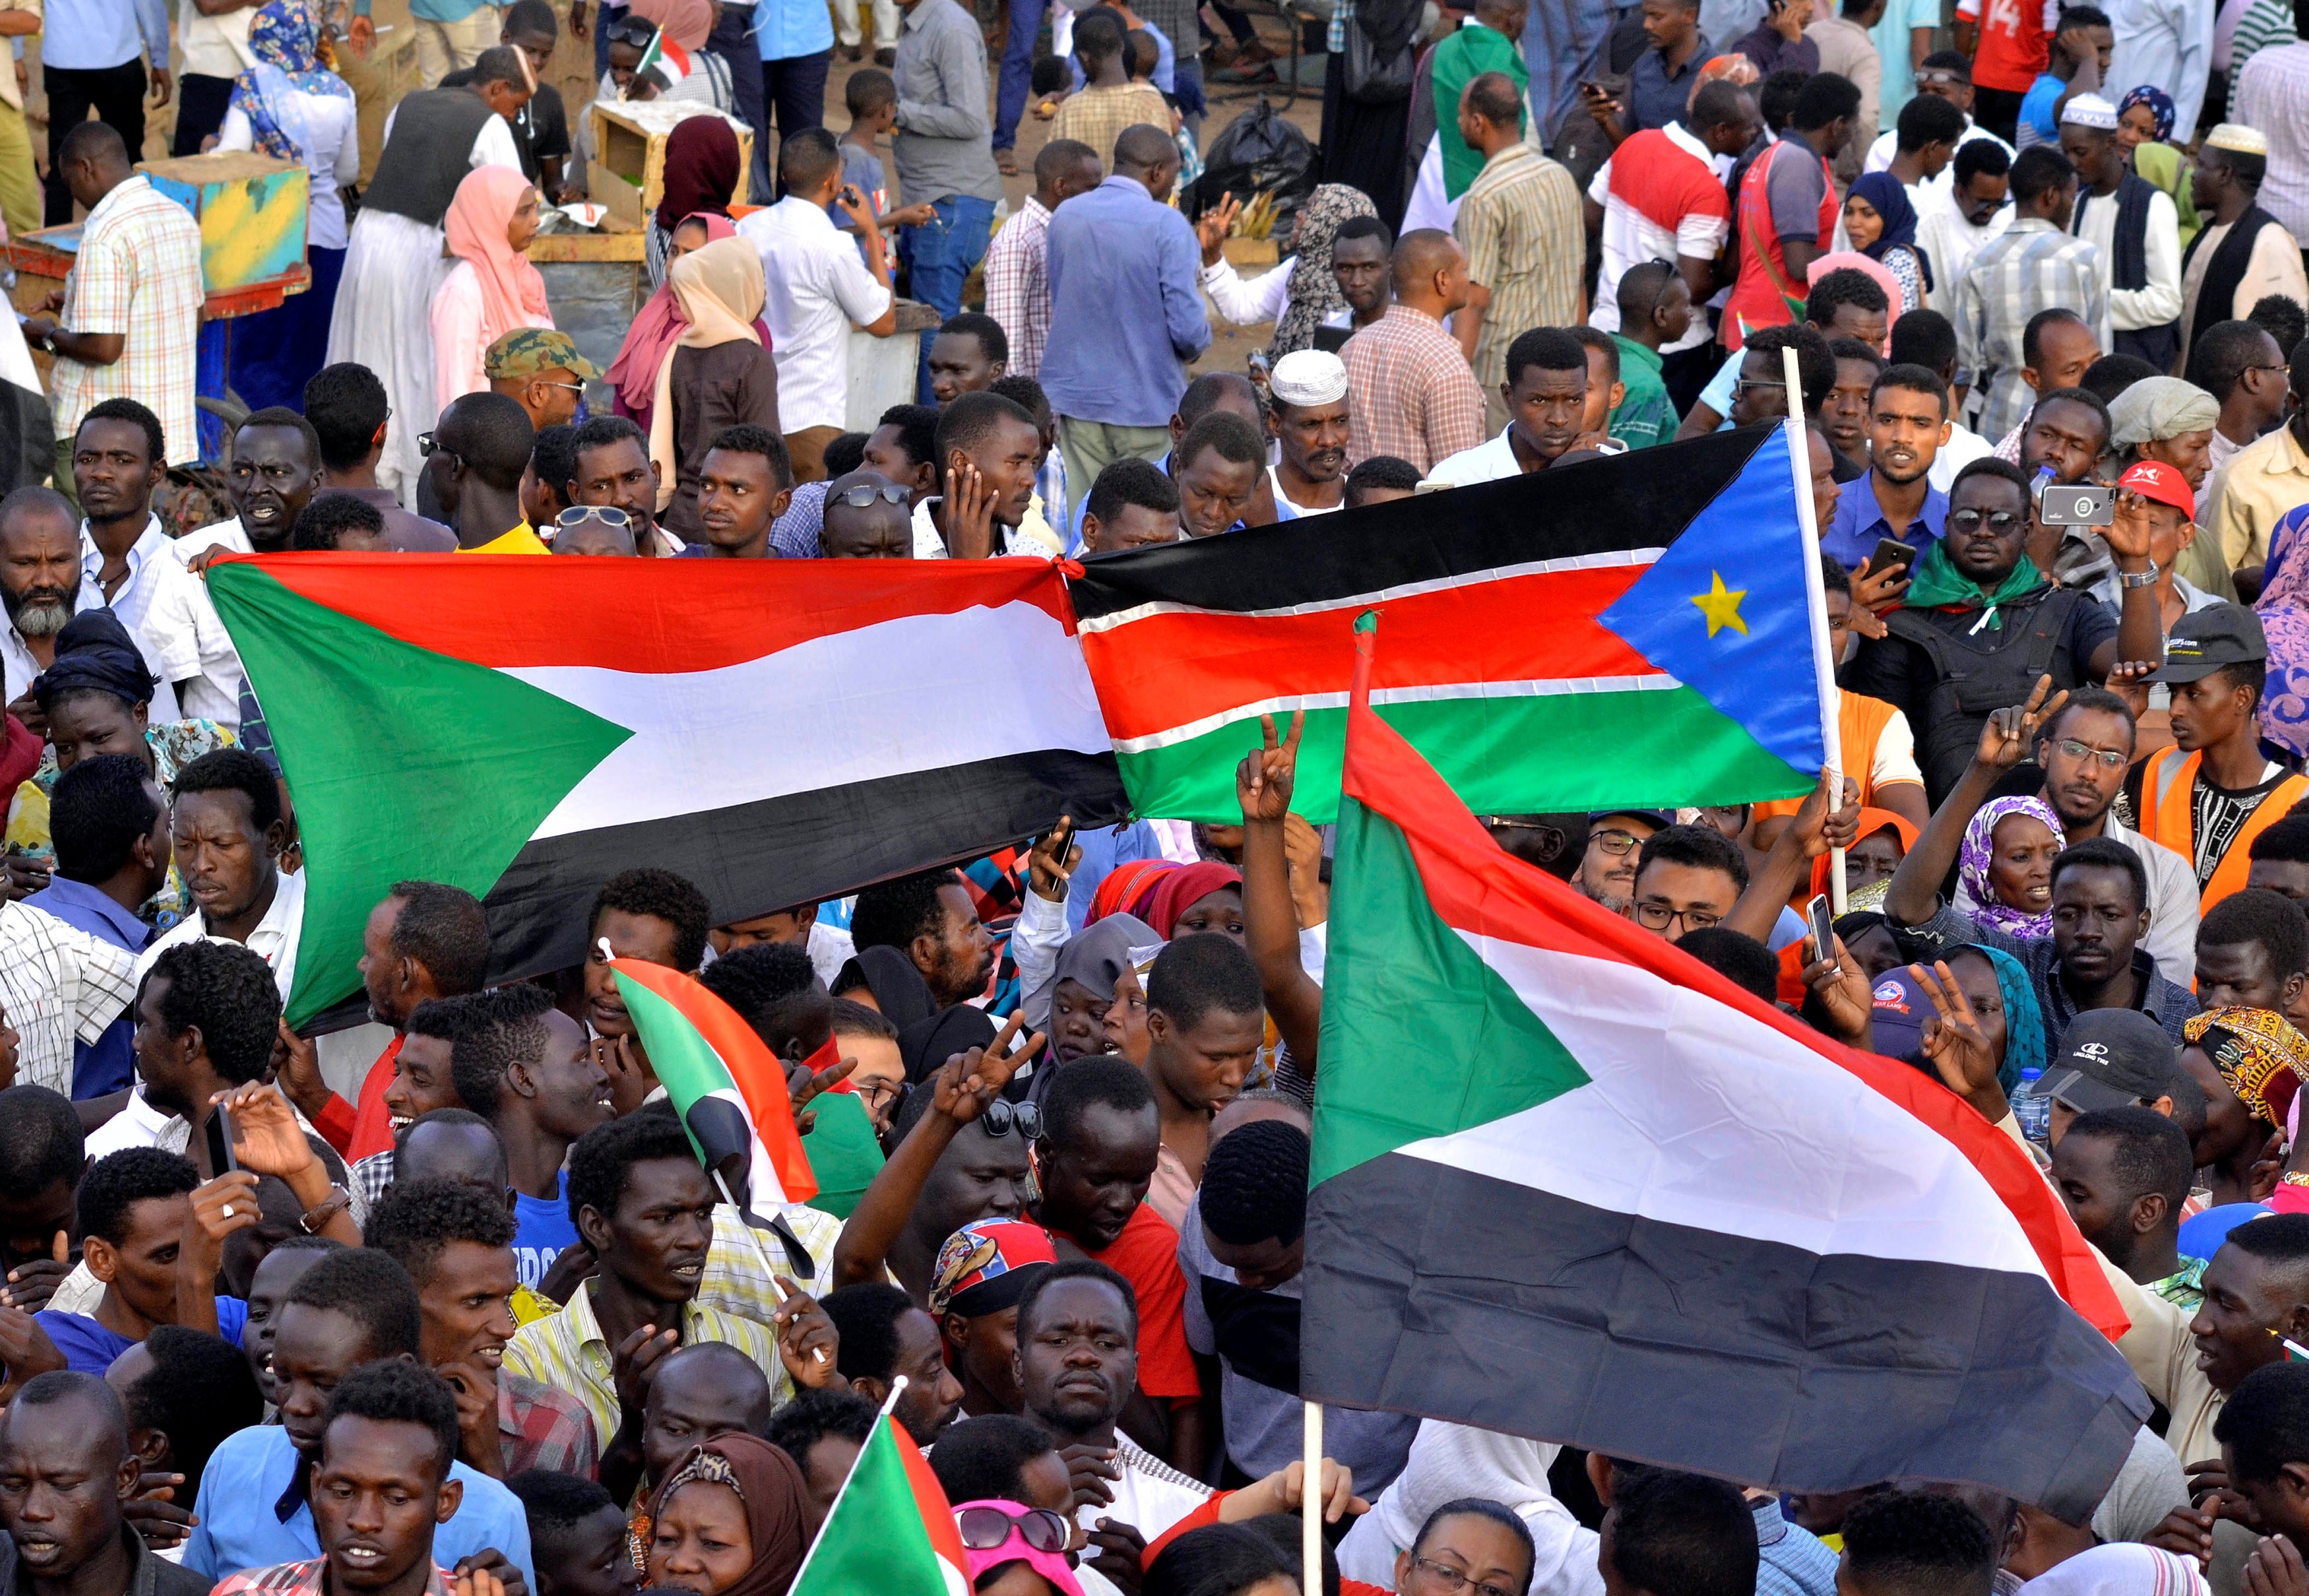   Sudanese demonstrators display their national flag and the national flag of South Sudan on 14 April (REUTERS)